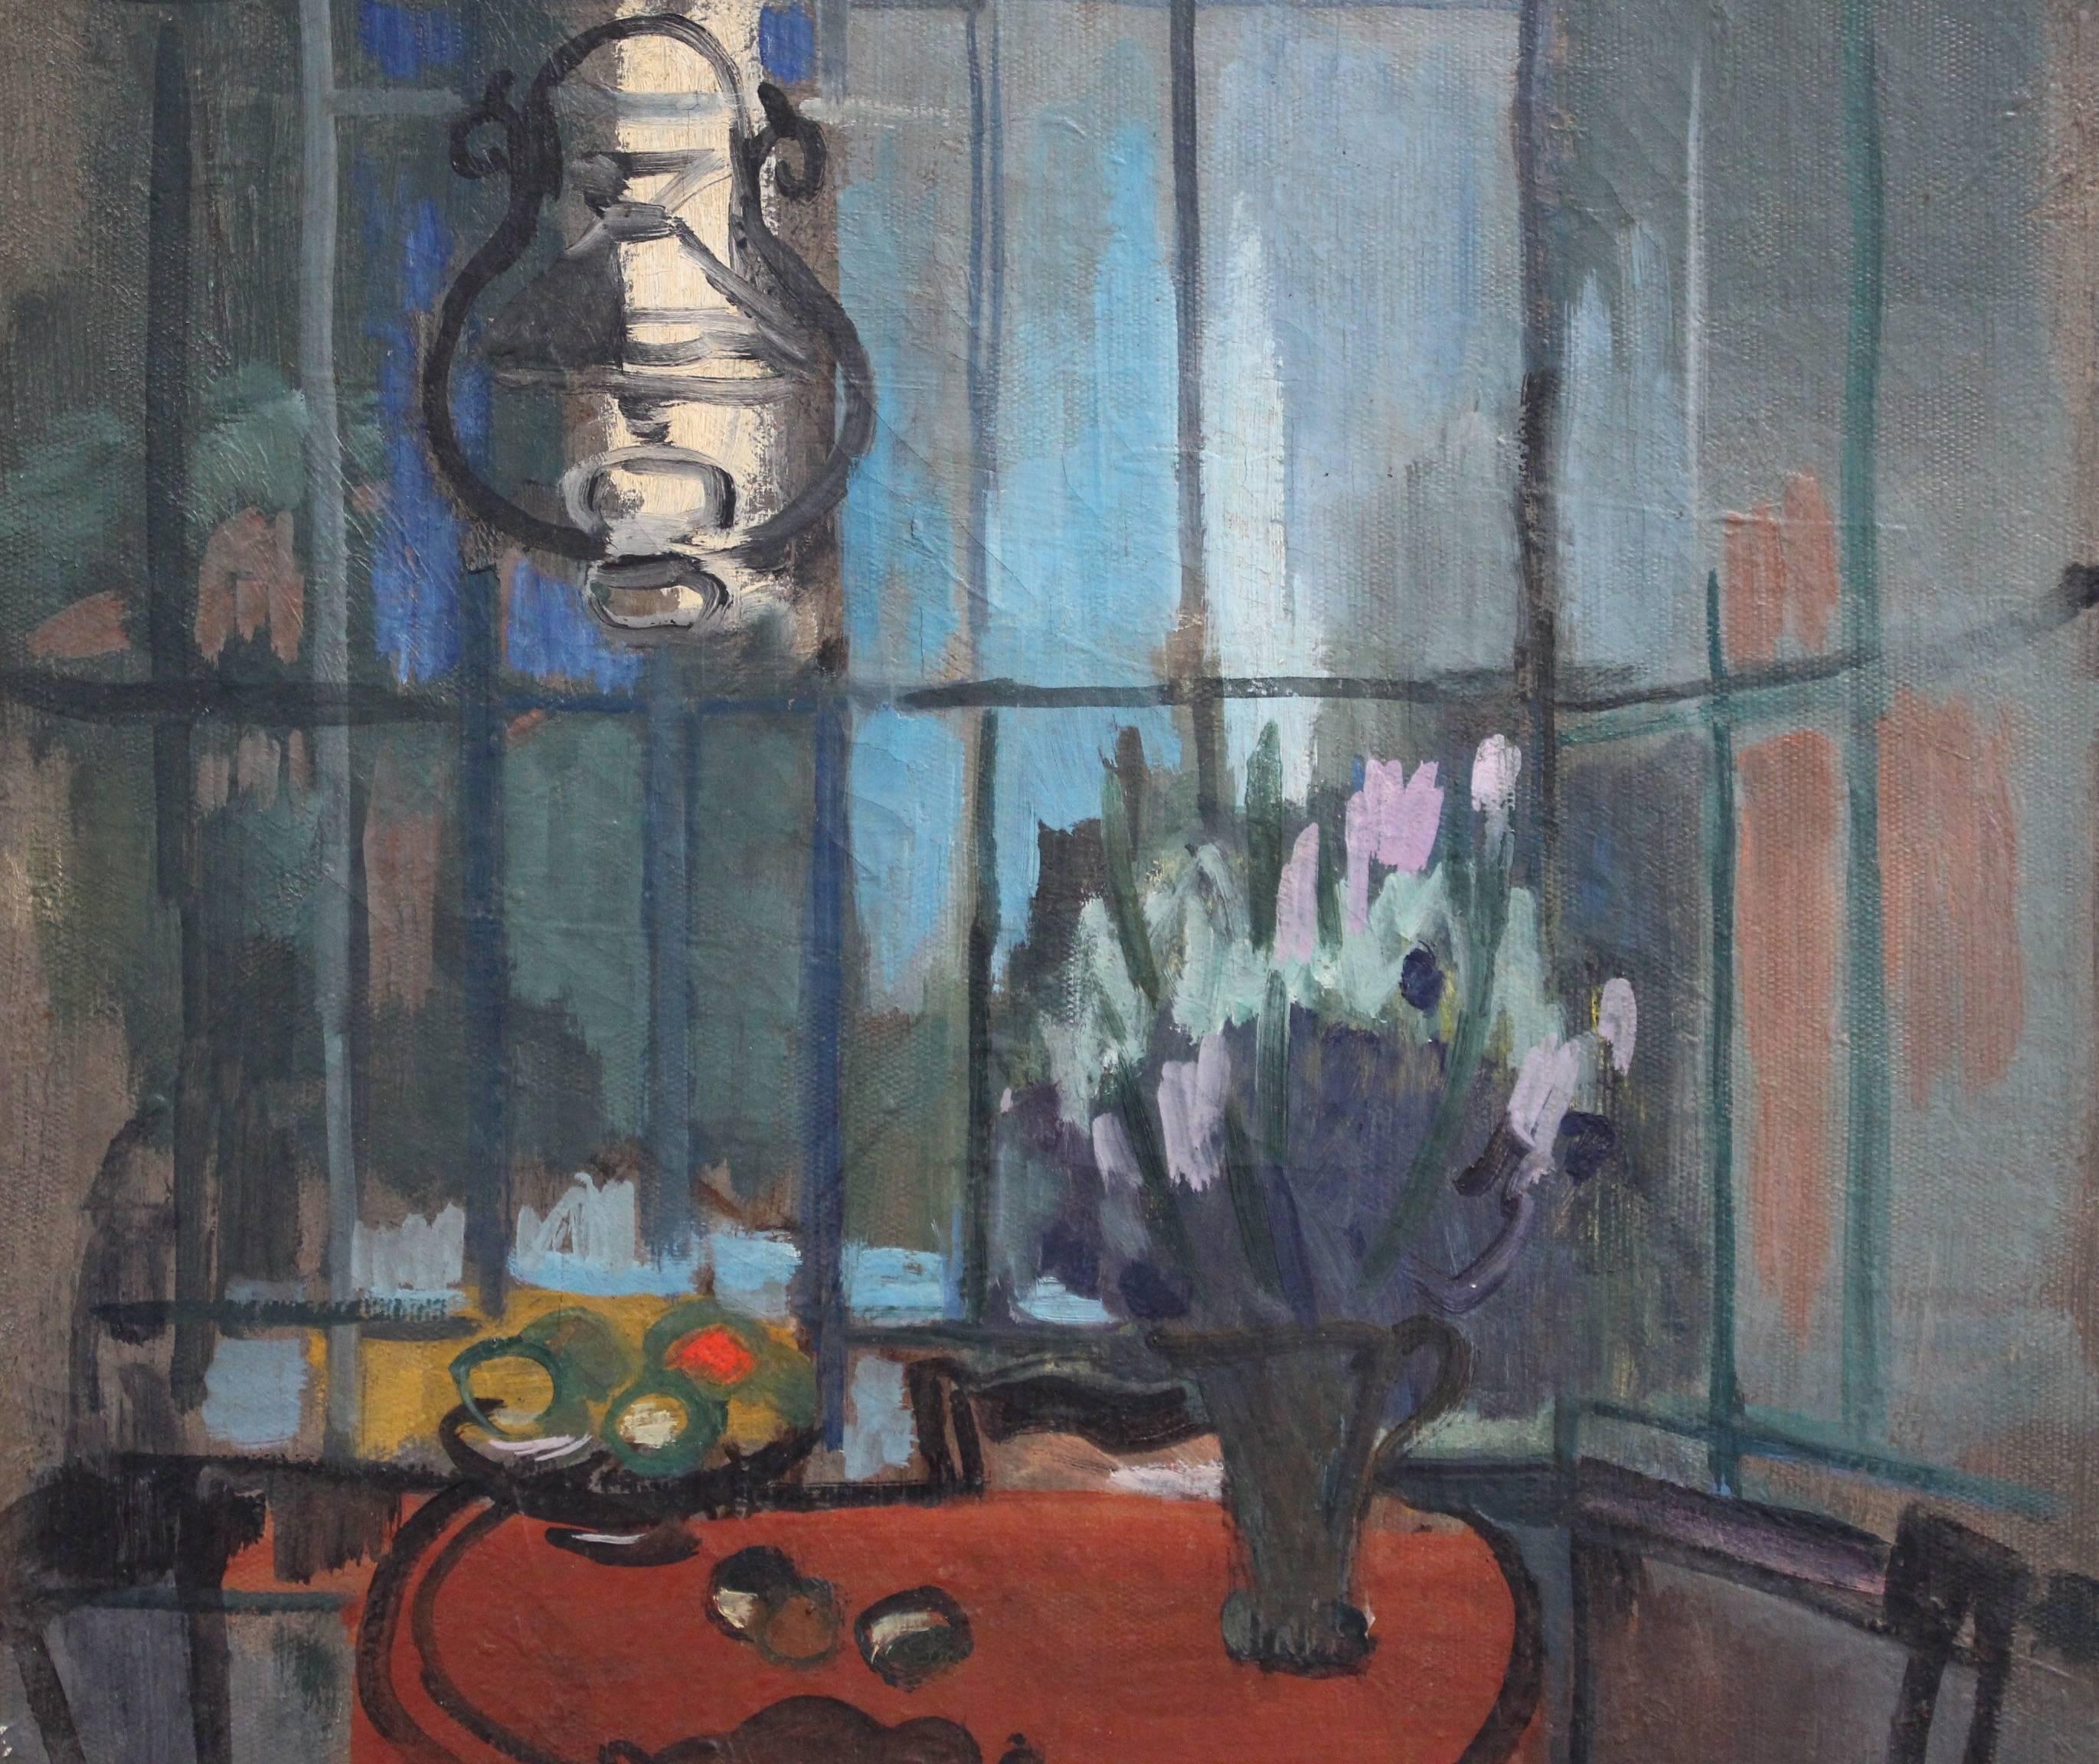 'Interieur', oil on canvas (1950), by Lili Pieter Van Leer (1905 - 1966). The sensuous mood captured by the artist in this work is extraordinary. The subdued colours of the evening light seep through the delicate conservatory-style windows. The